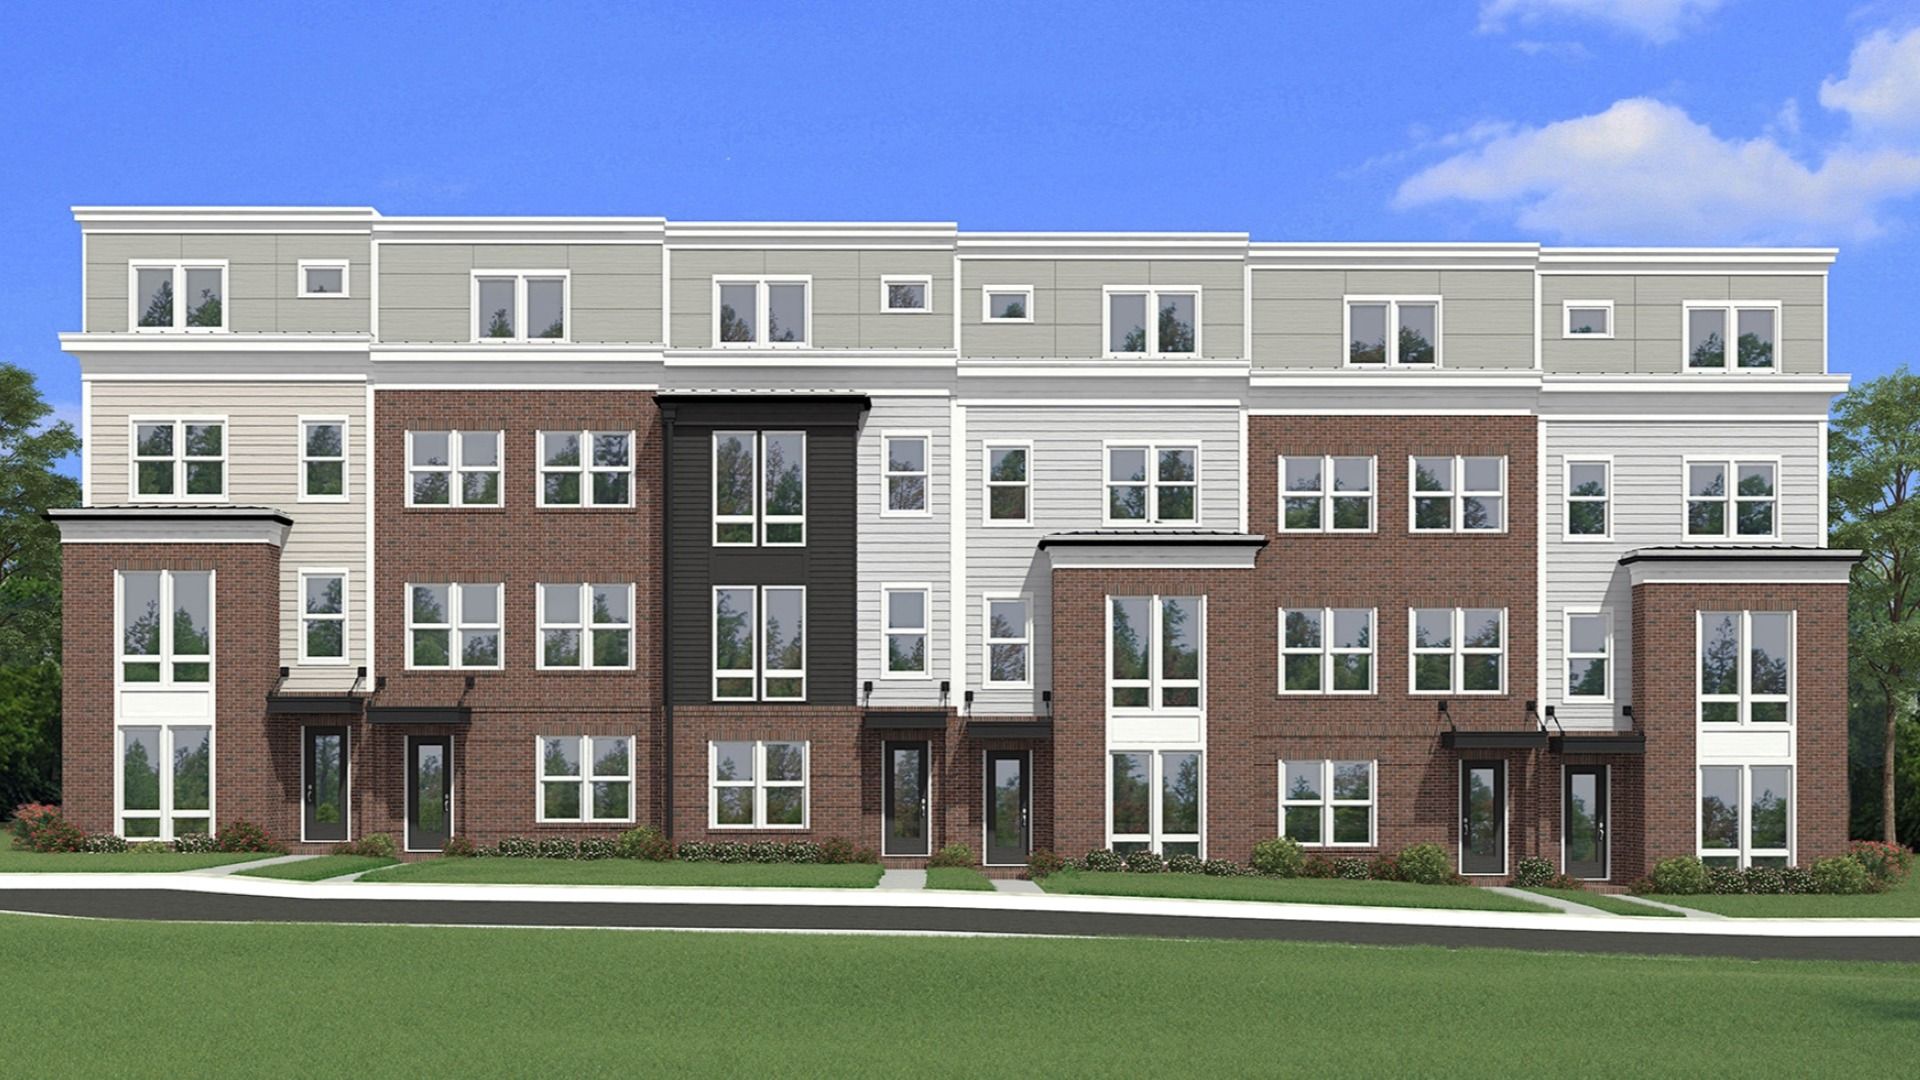 Cary Townhome Exterior:Cary Exterior Rendering -- Rear-Load, 2-Car Garage Townhomes at Northfax West Located in the City of Fairfax